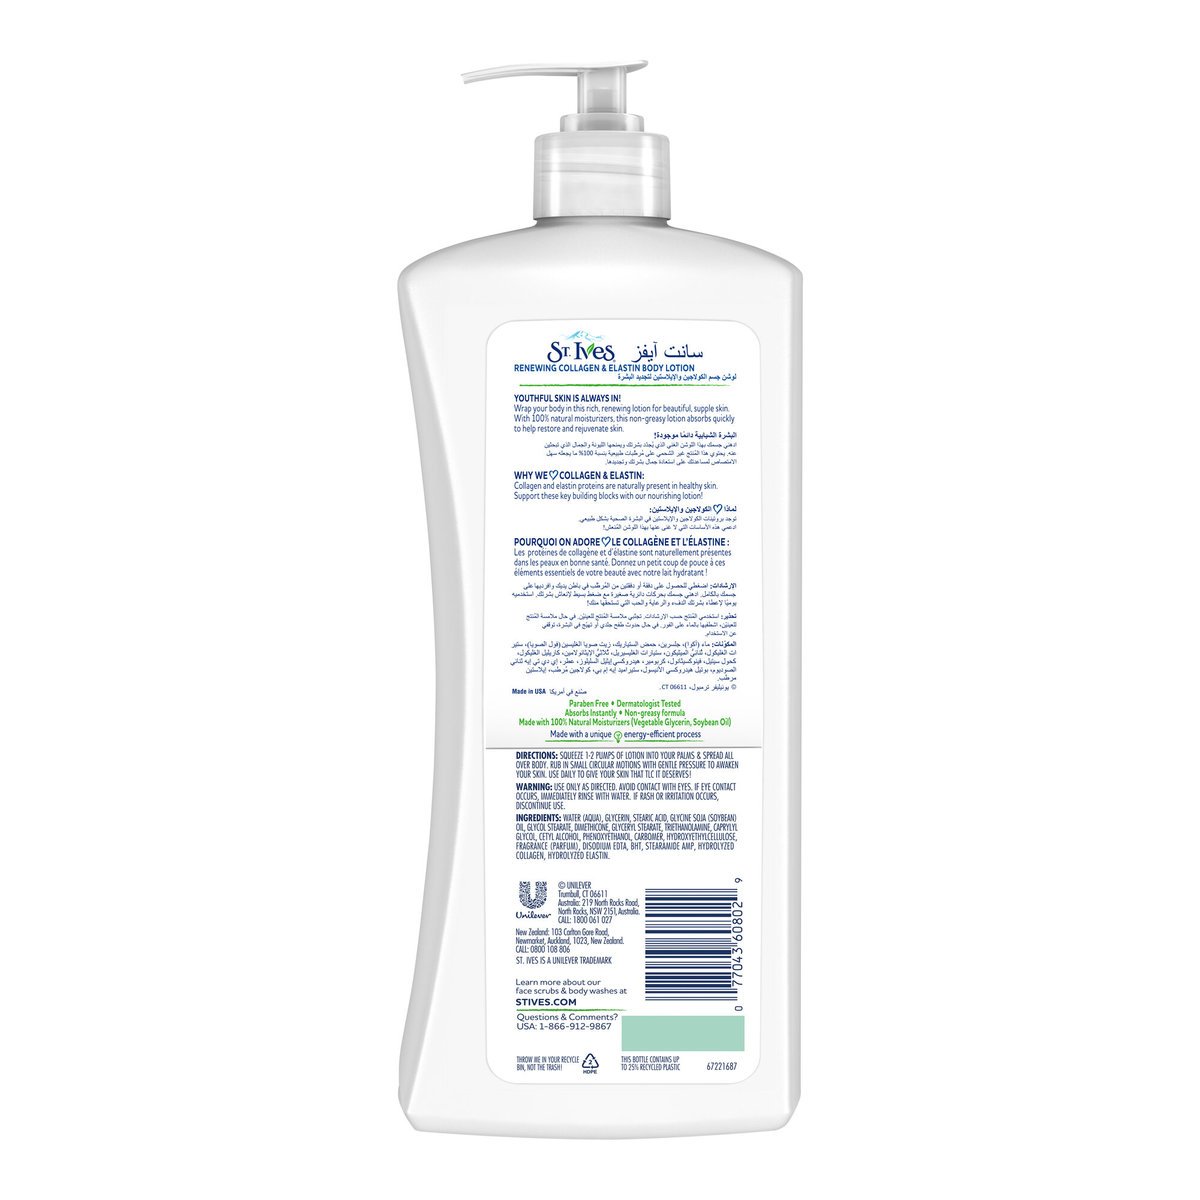 St. Ives Renewing Body Lotion 621 ml